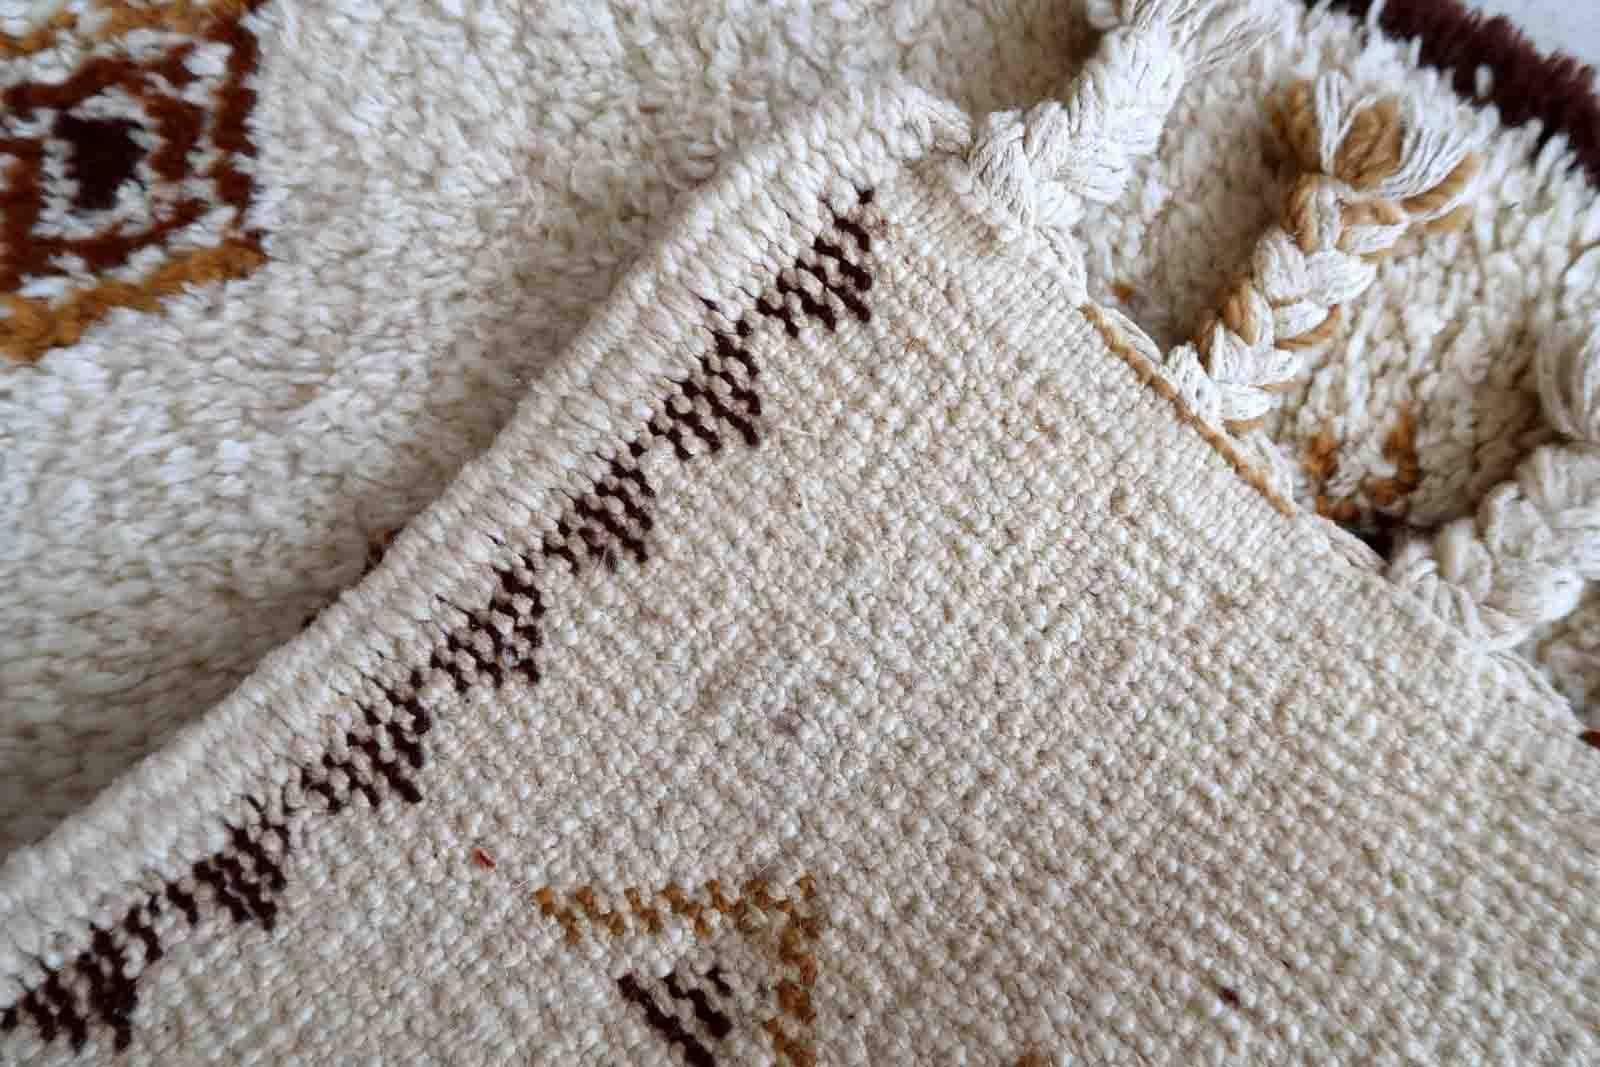 Handmade vintage Moroccan Berber woolen rug in white and brown colors. The rug is from the end of 20th century in original good condition.

-condition: original good,

-circa: 1970s,

-size: 2.4' x 4.4' (74cm x 136cm),

-material: